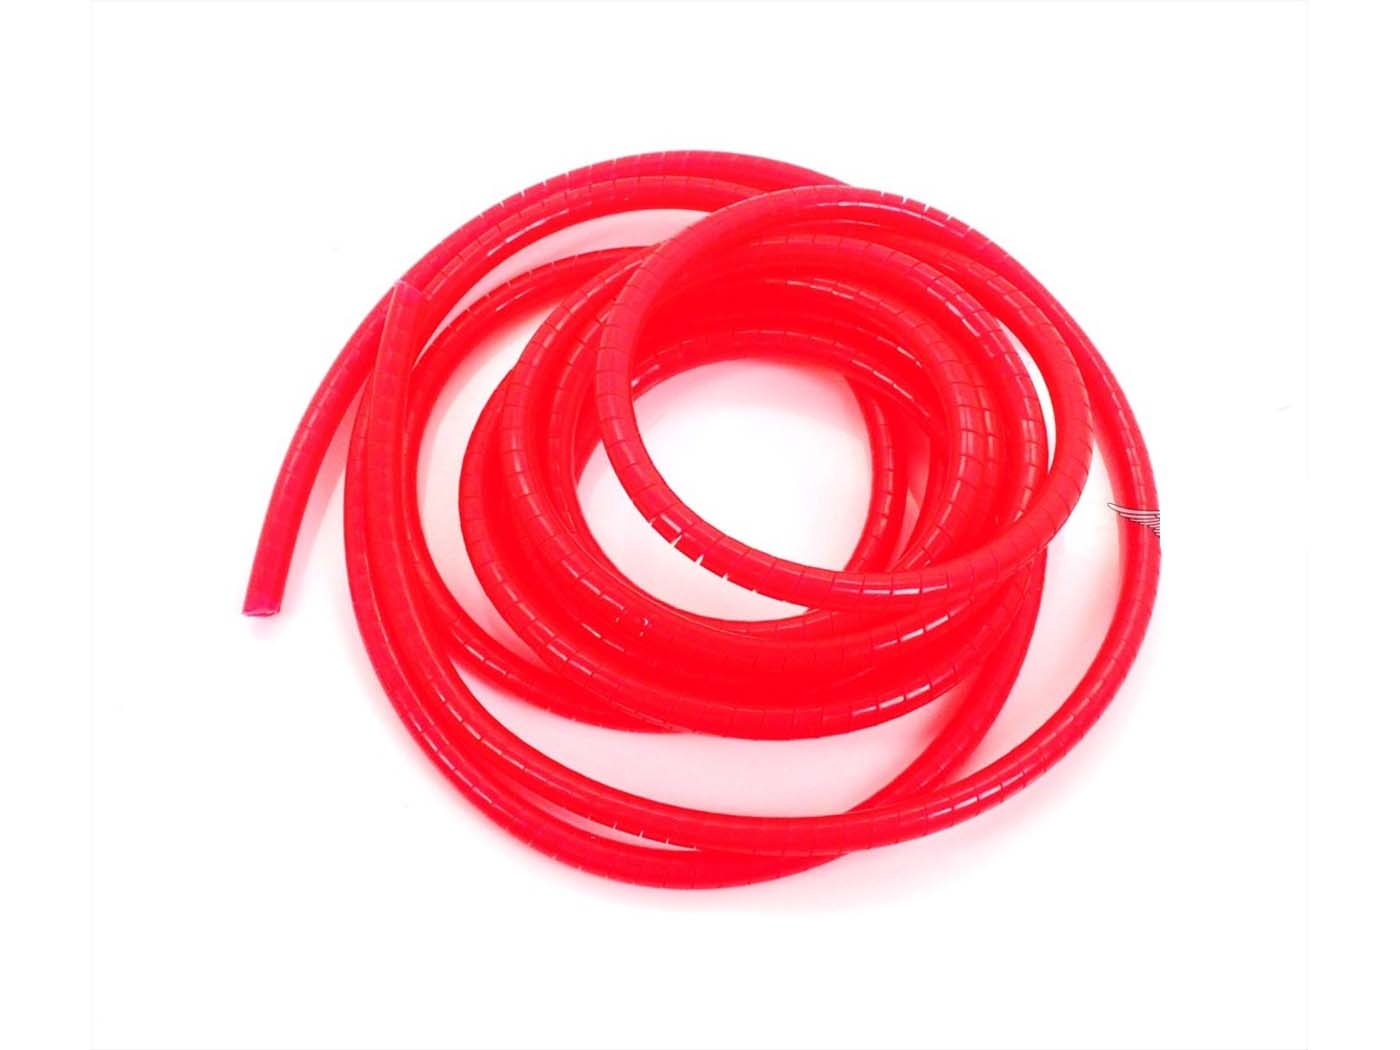 Bowden Cable Cable Harness Fuel Hose Bowden Cable Cover For Moped Moped In Red